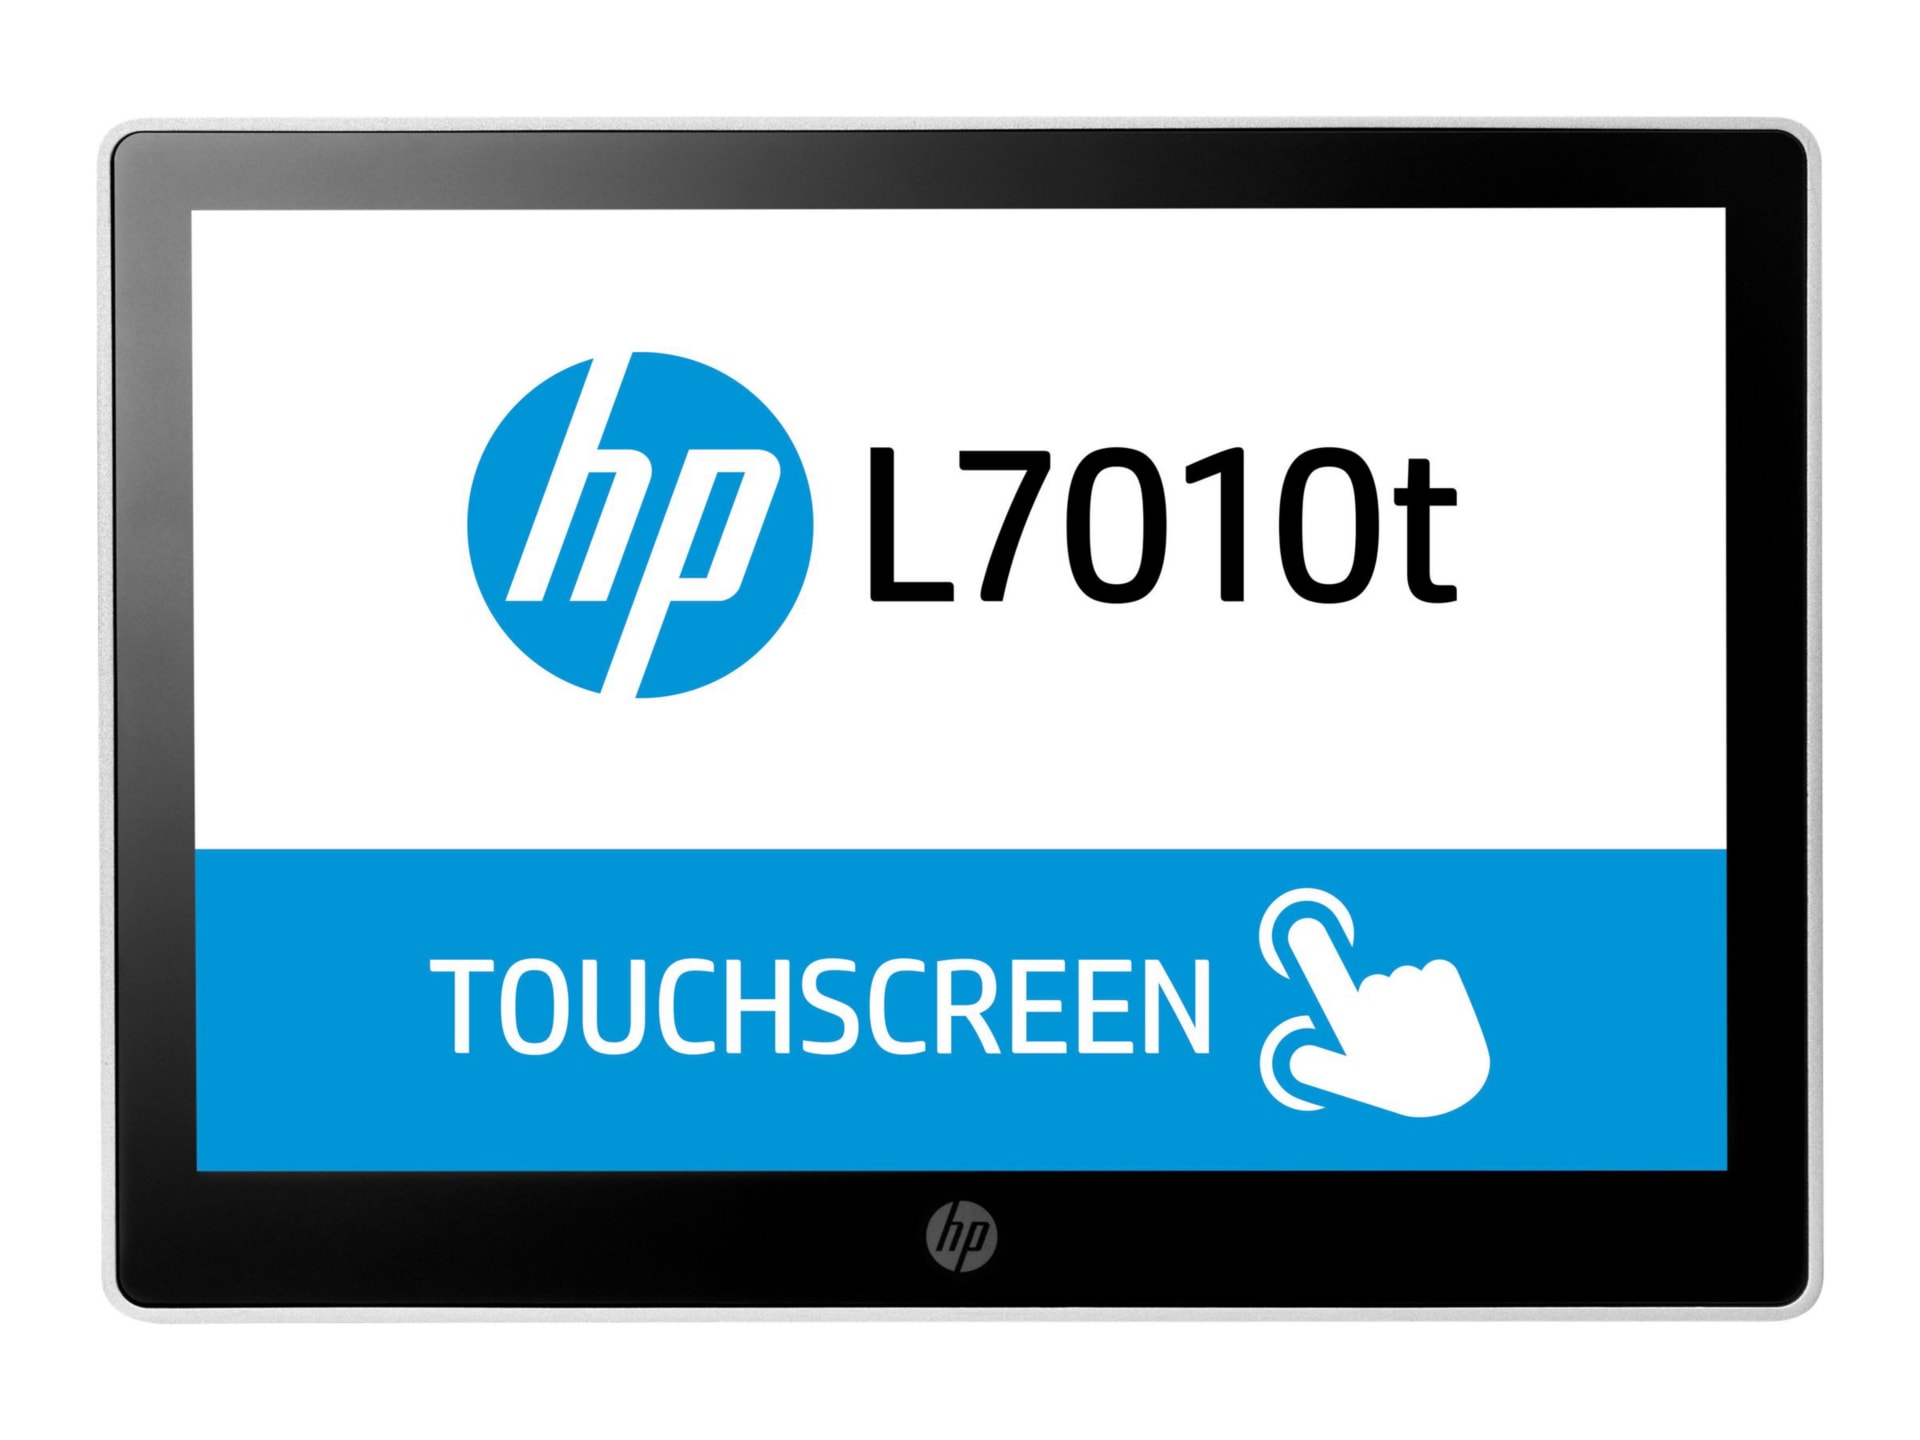 HP L7010t LCD Touchscreen Monitor - 16:9 - 30 ms